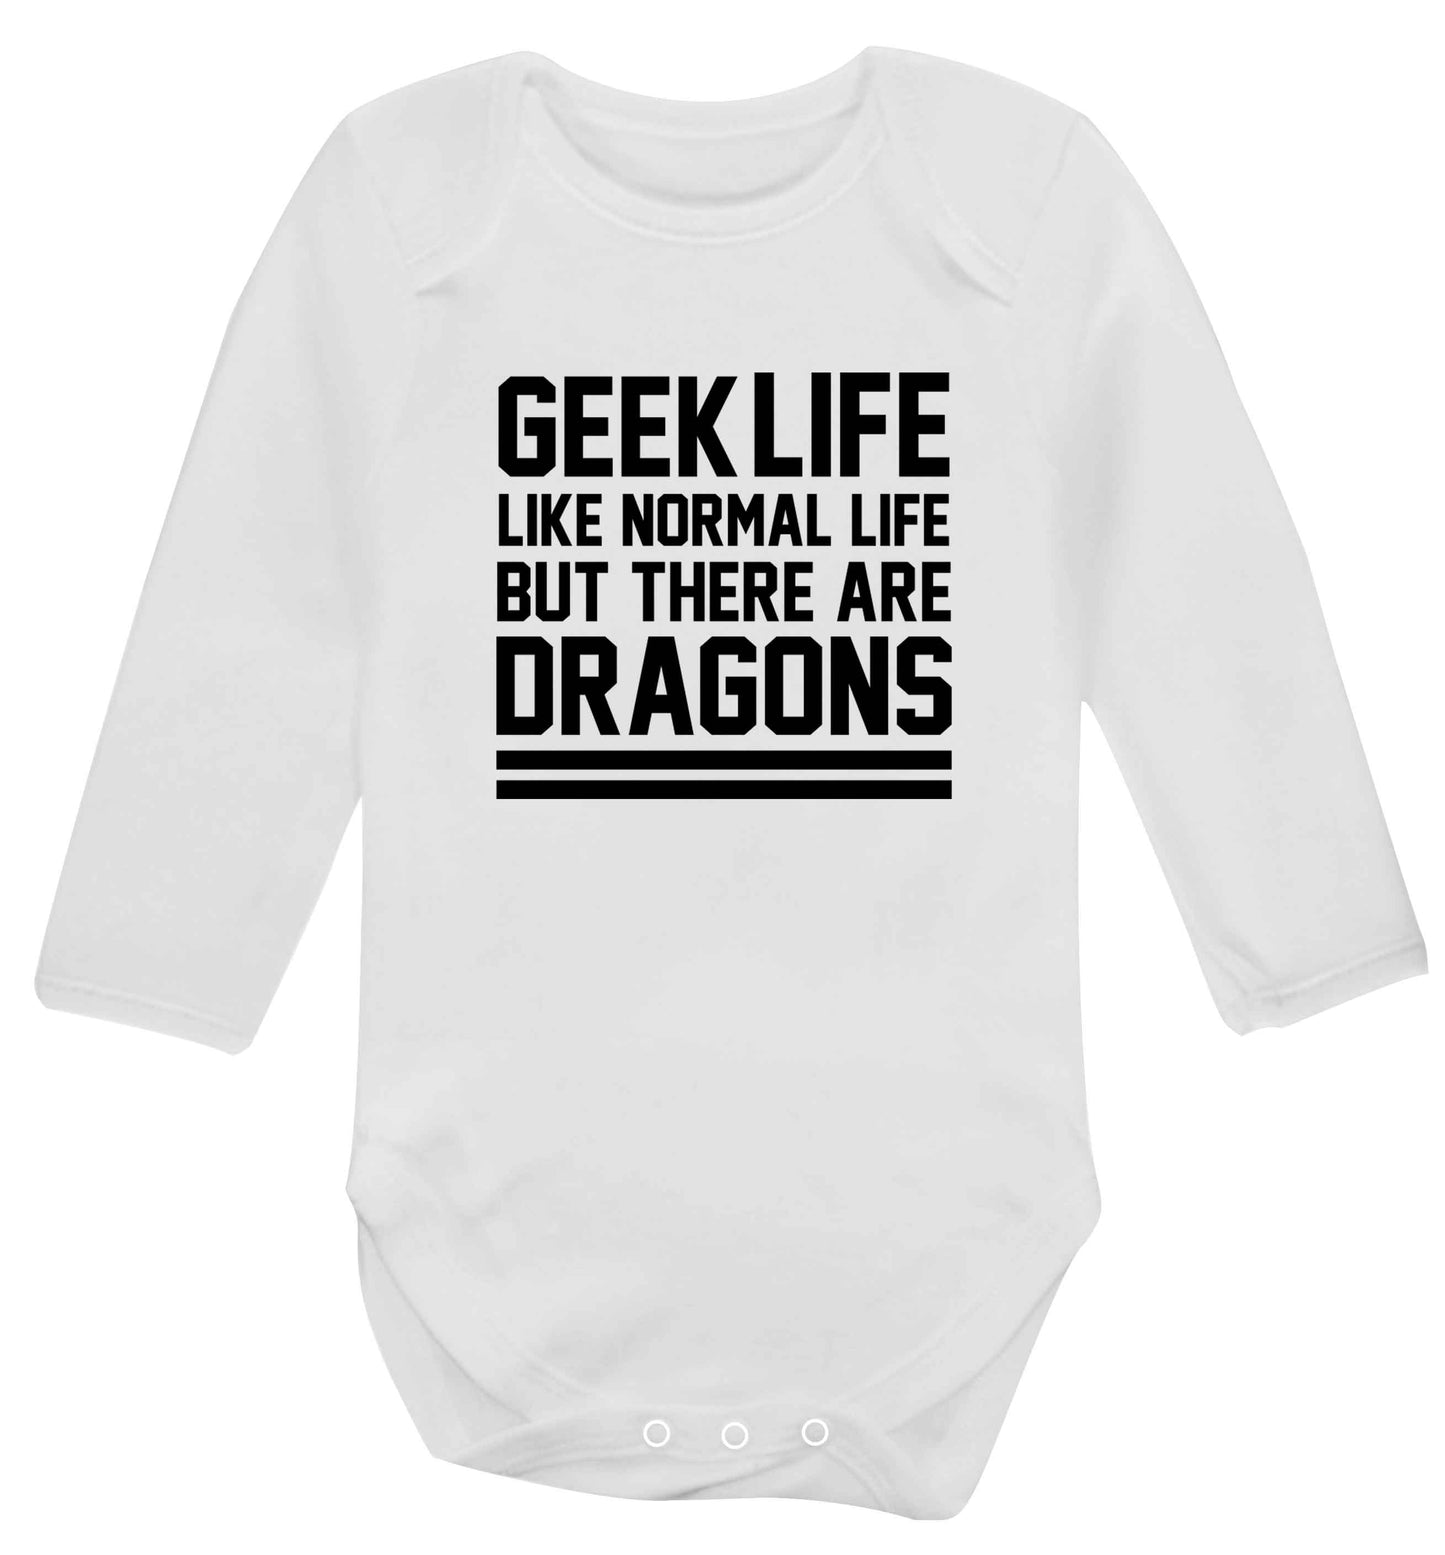 Geek life like normal life but there are dragons baby vest long sleeved white 6-12 months